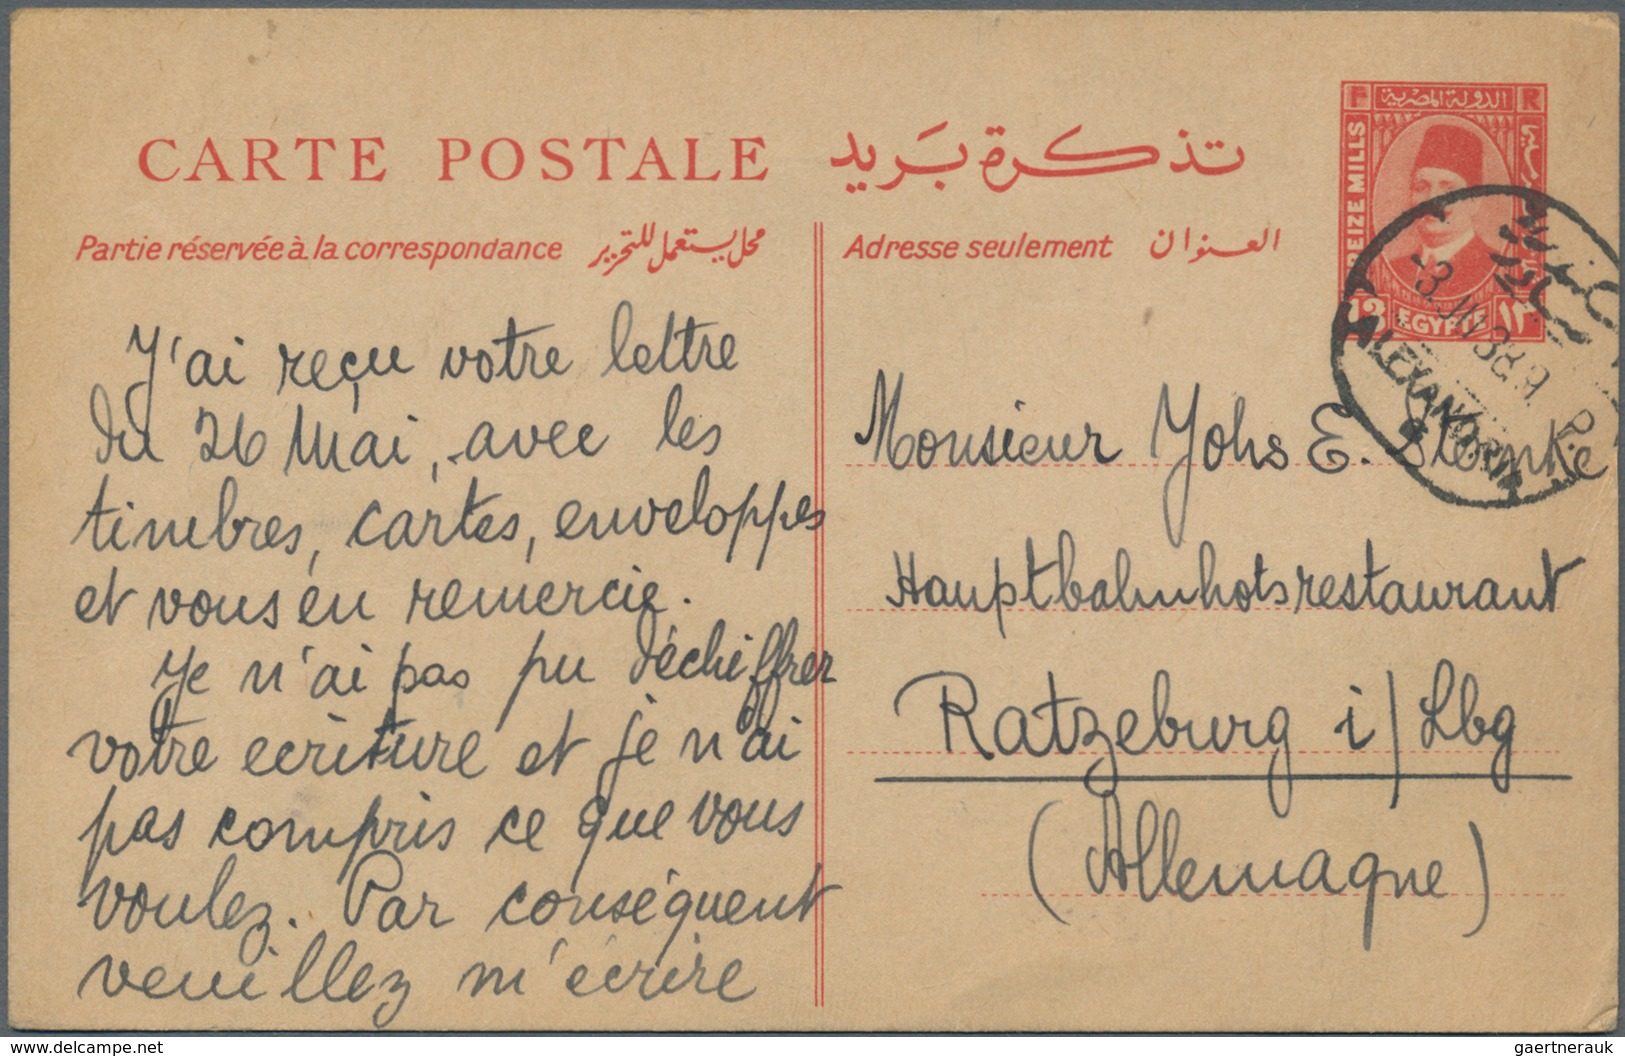 Ägypten: 1892/1939: Two Postal Stationery Items And One Cover, With 1) P/s Envelope 5m., Uprated 1p. - 1866-1914 Khedivaat Egypte